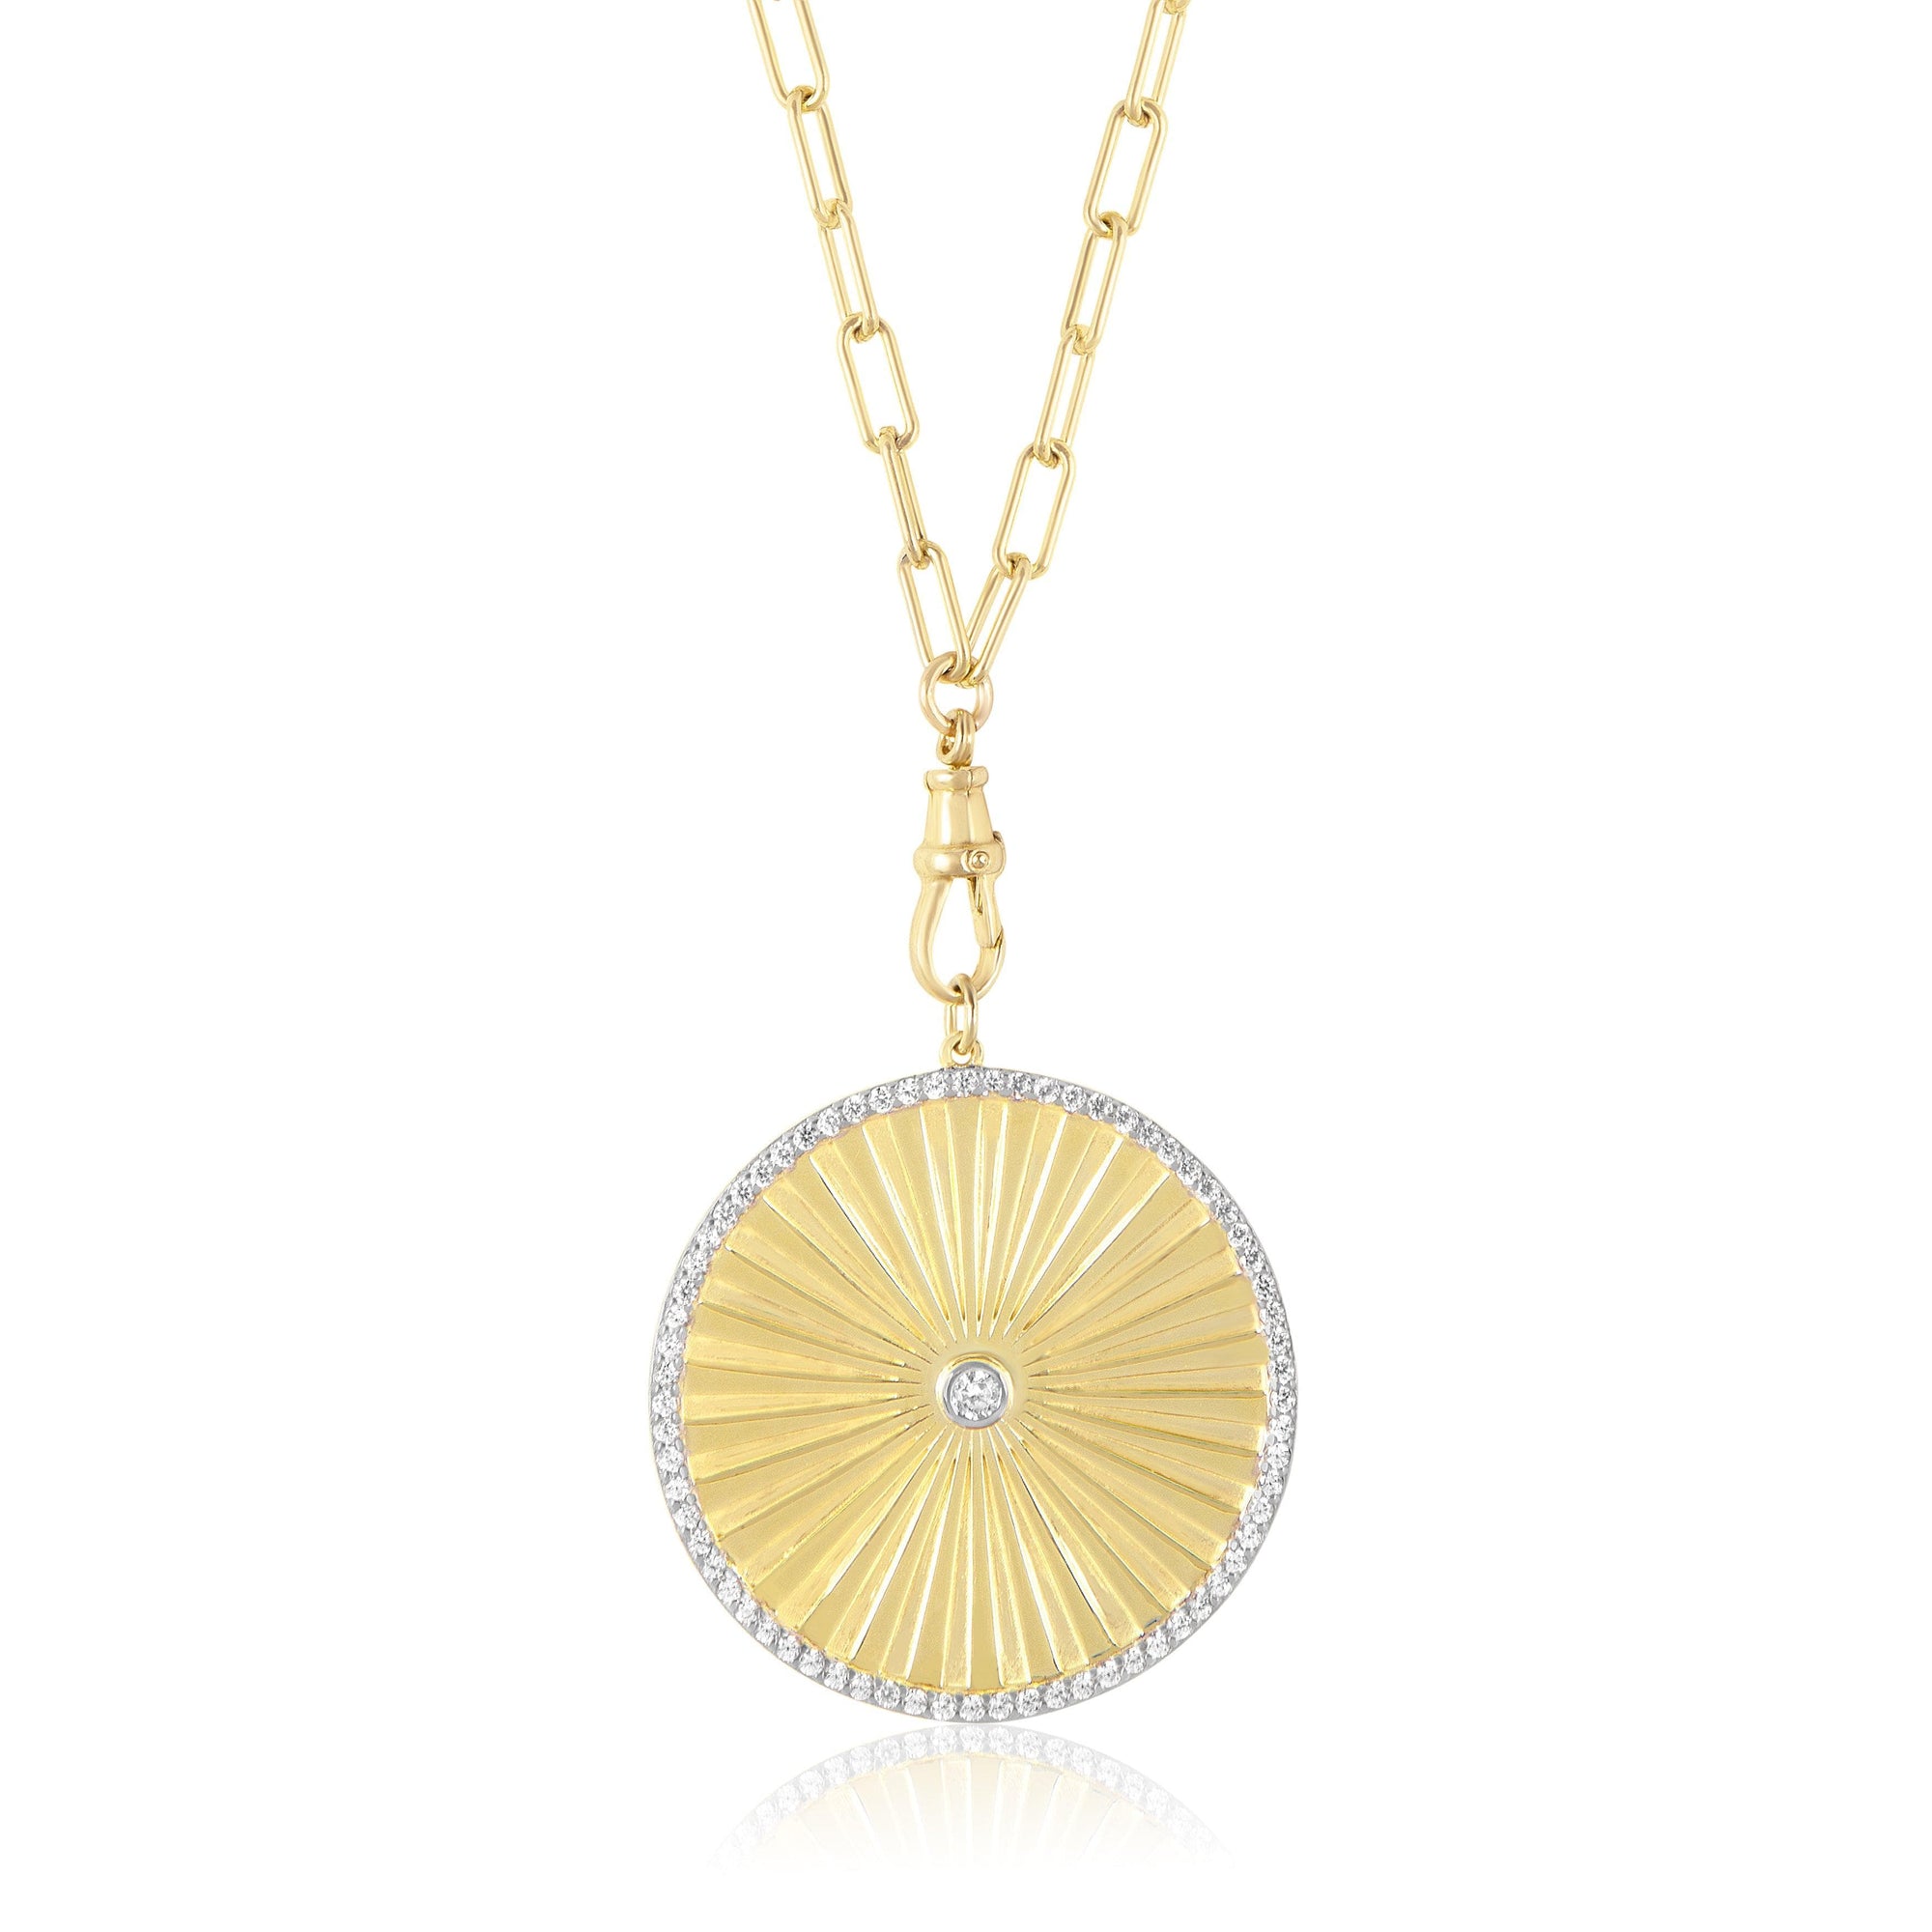 jumbo fluted disc charm necklace